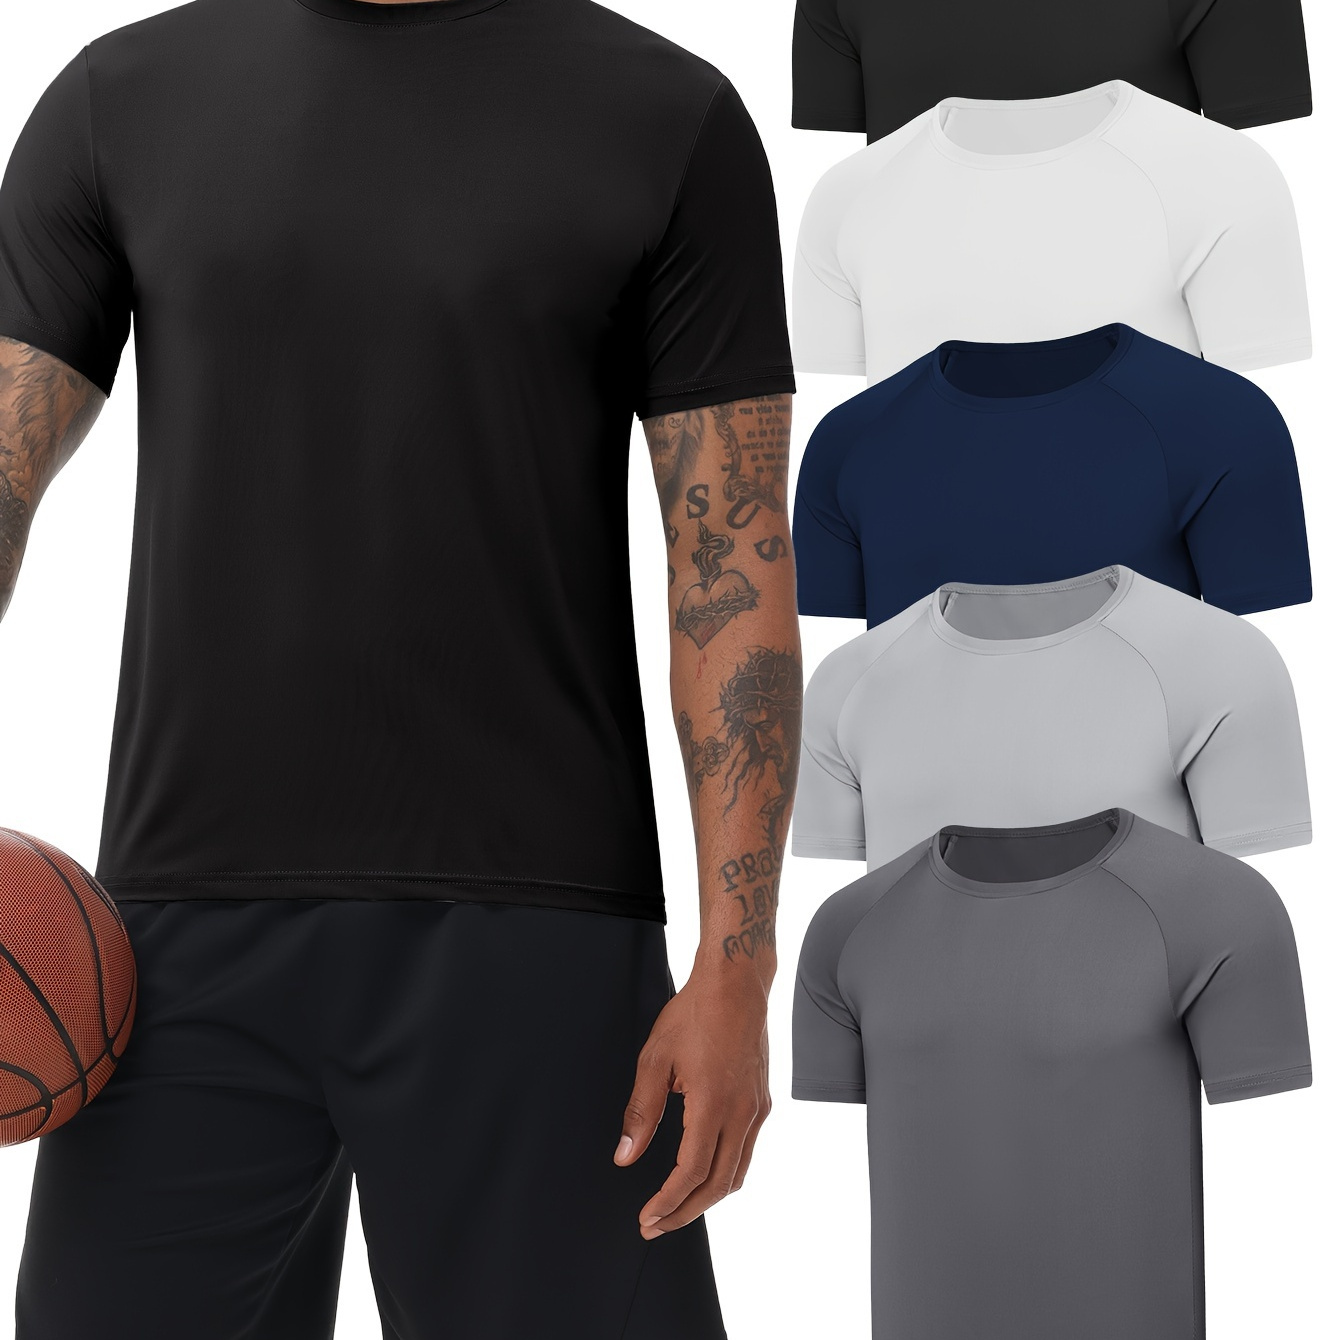 

5-pack Men's Short Sleeve Dry Athletic Crew Neck T-shirts - Moisture Wicking Running Gym Workout T-shirts Tops